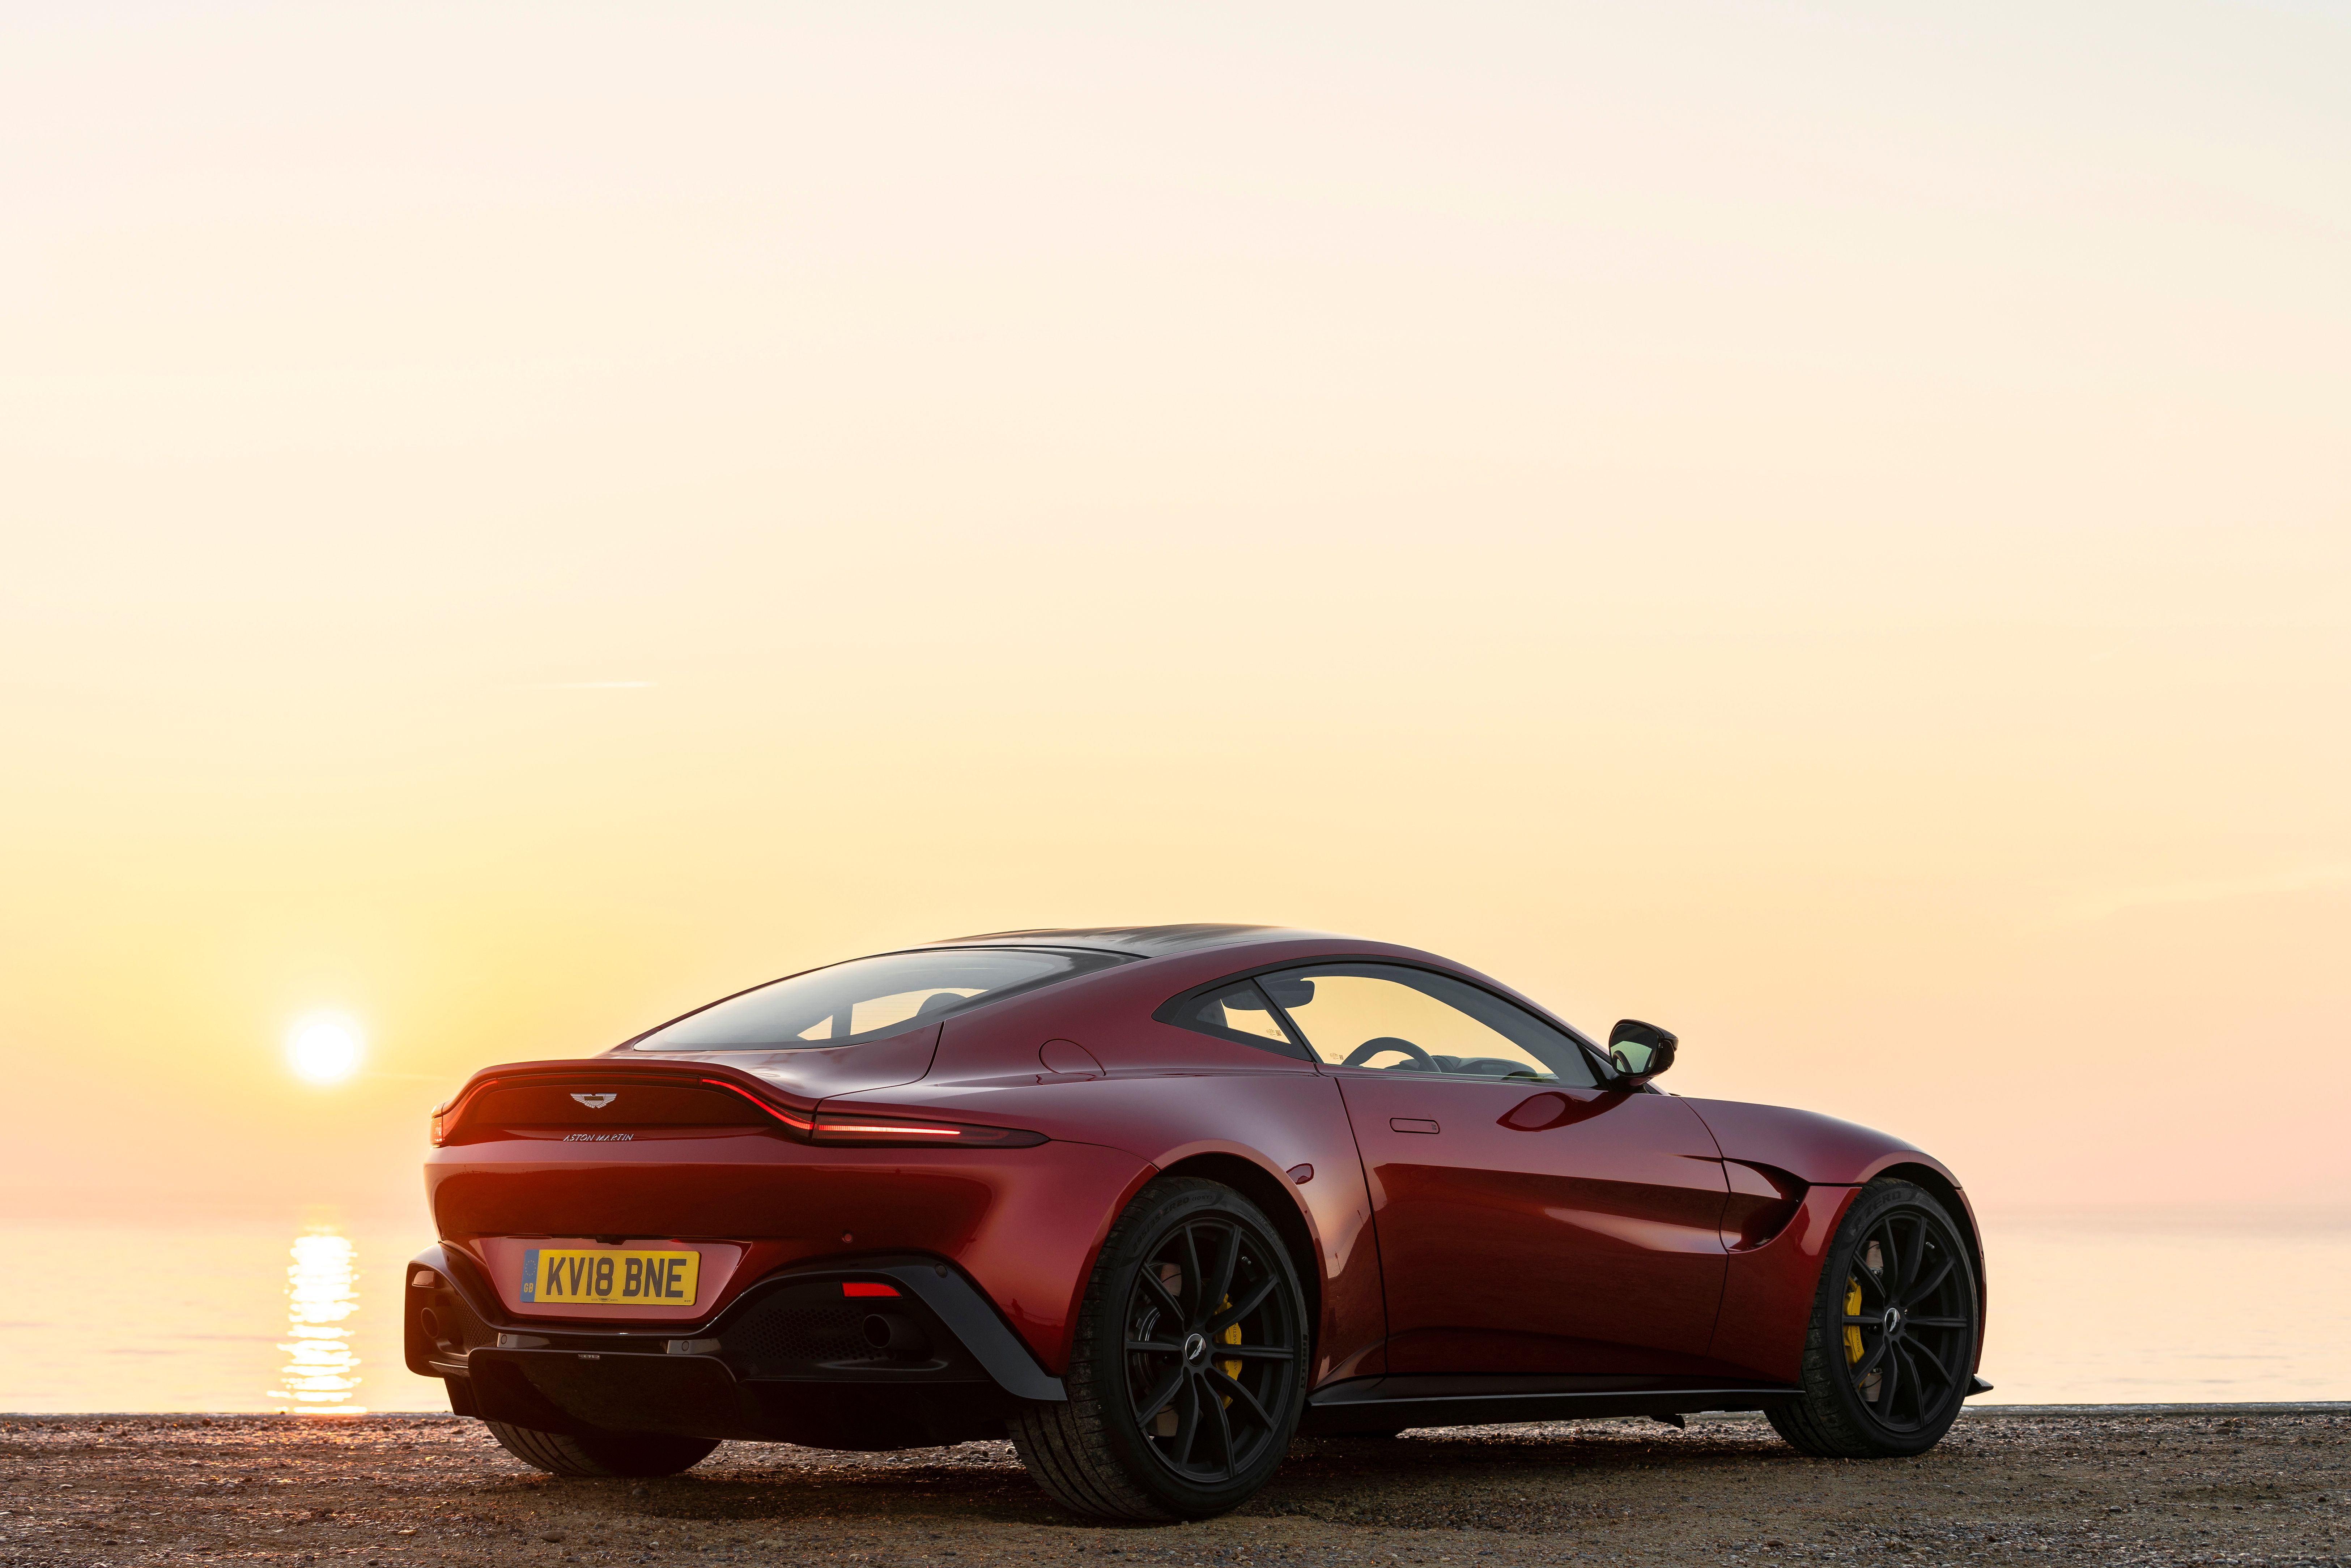 The rear of a red Vantage Coupe